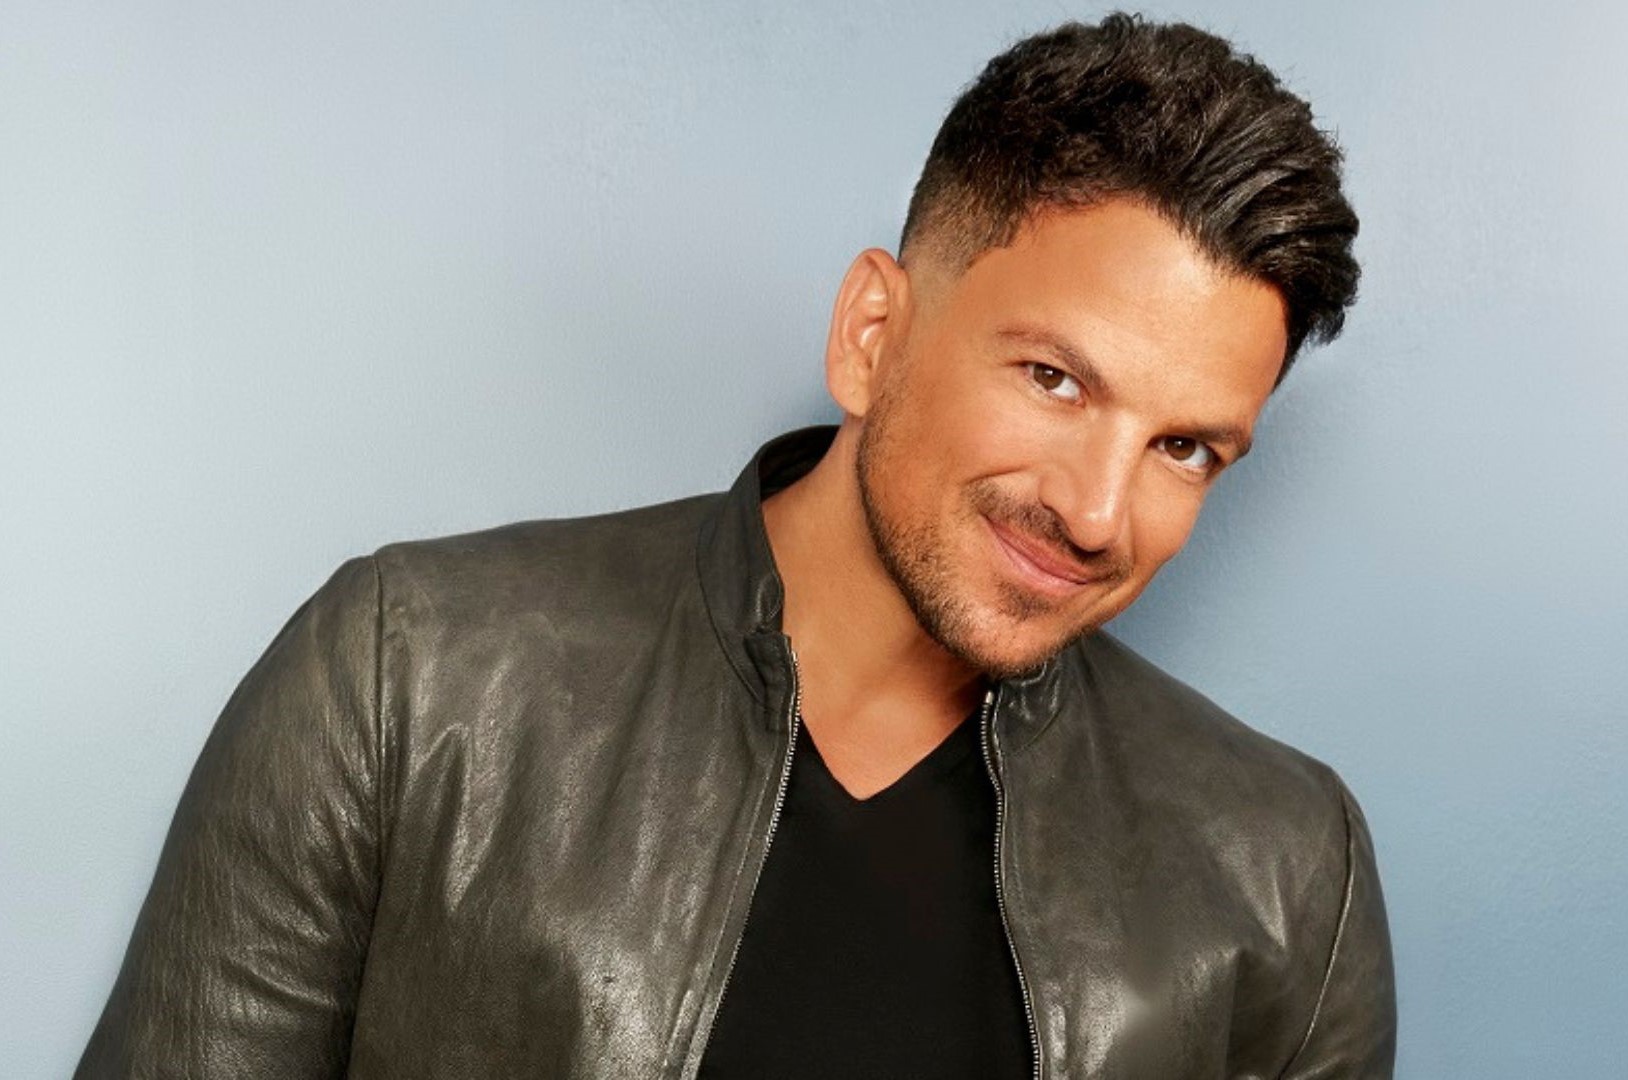 17 Fascinating Facts About Peter Andre - Facts.net